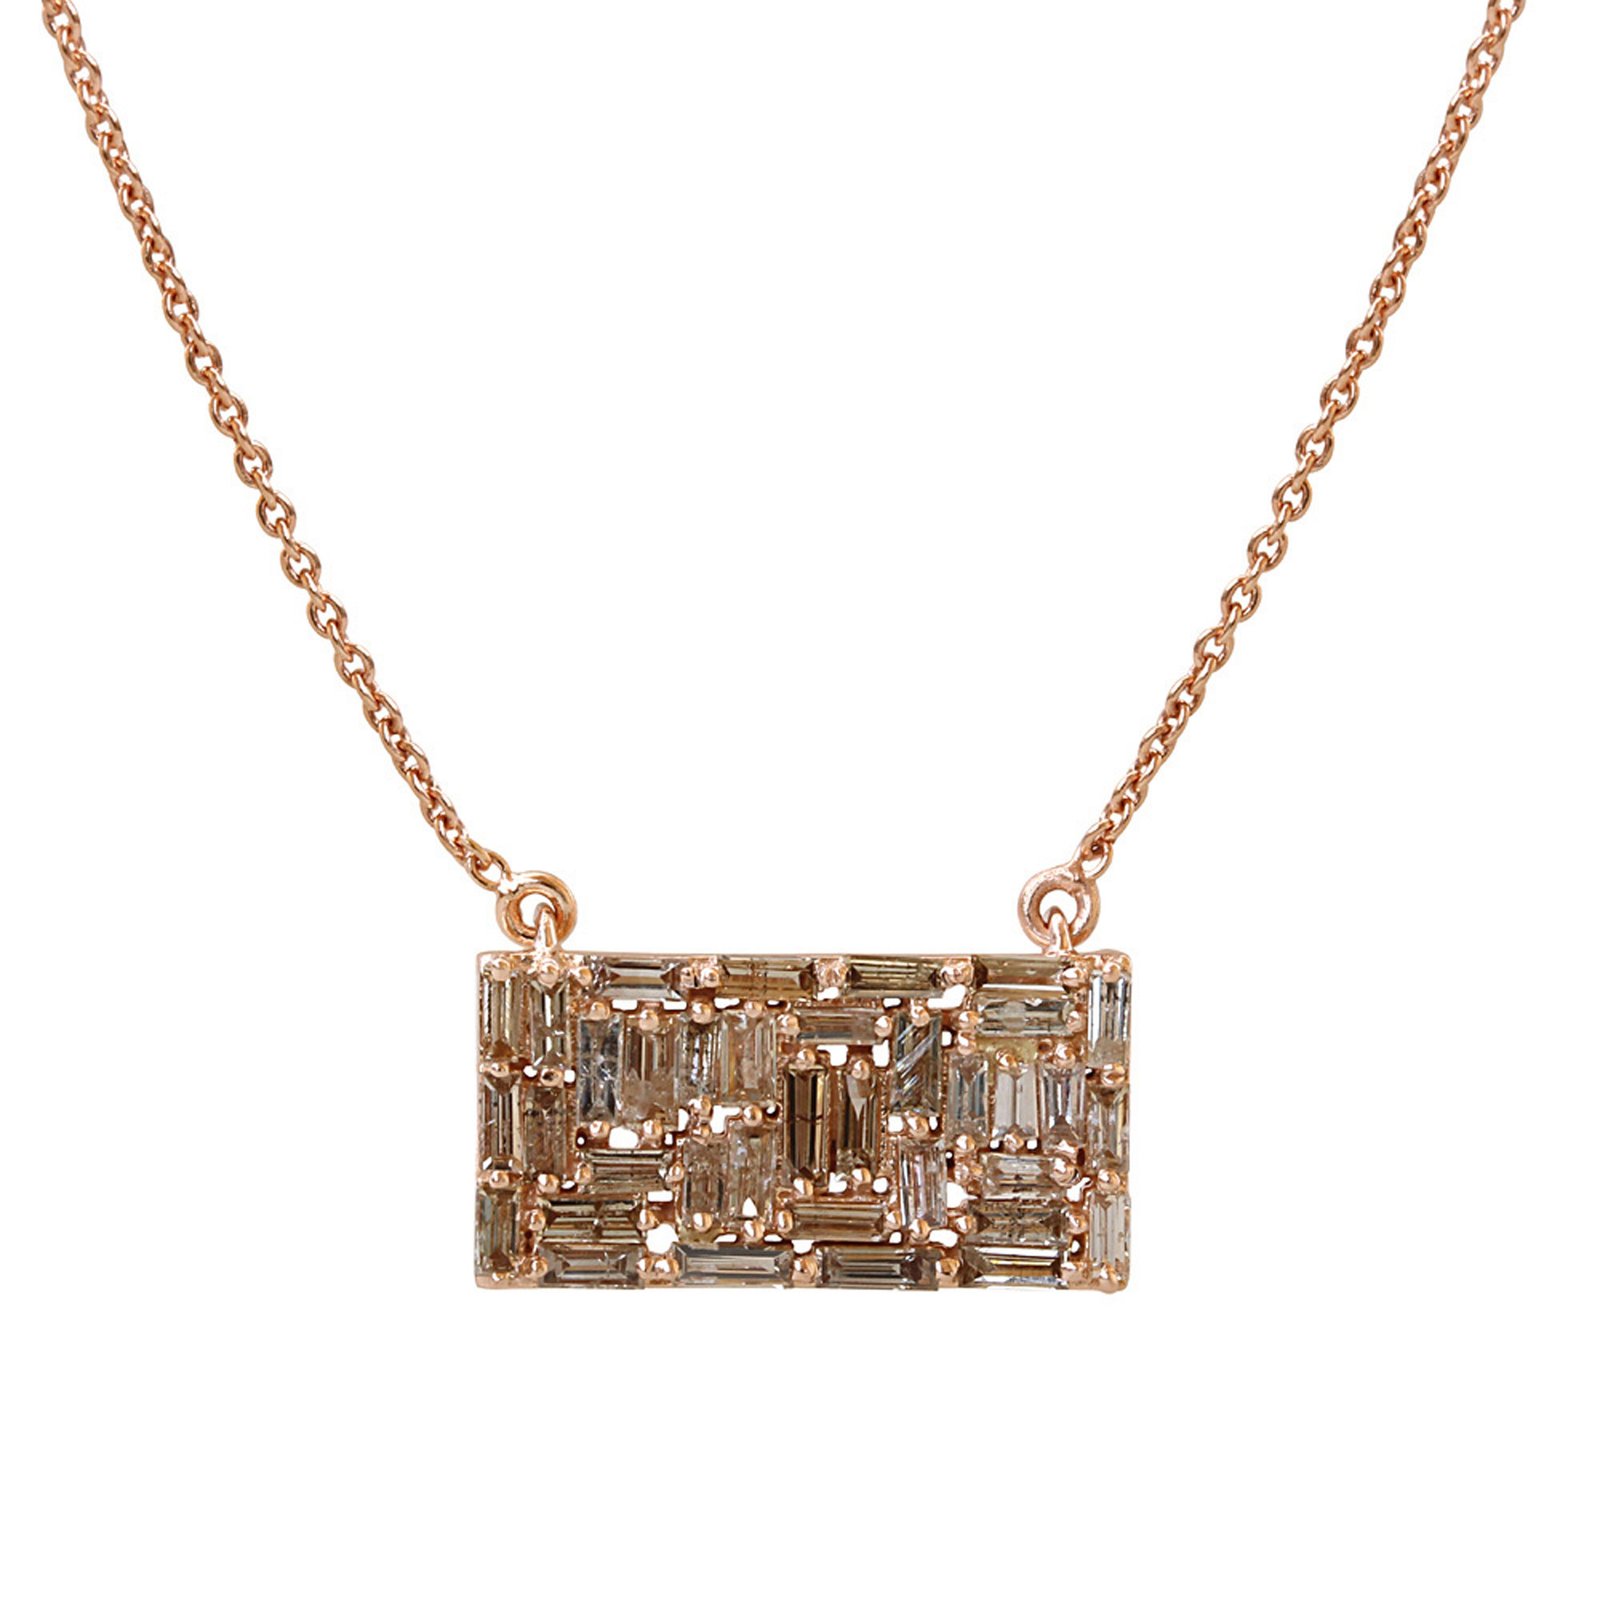 18k Solid gold baguette diamond pendant necklace with chain